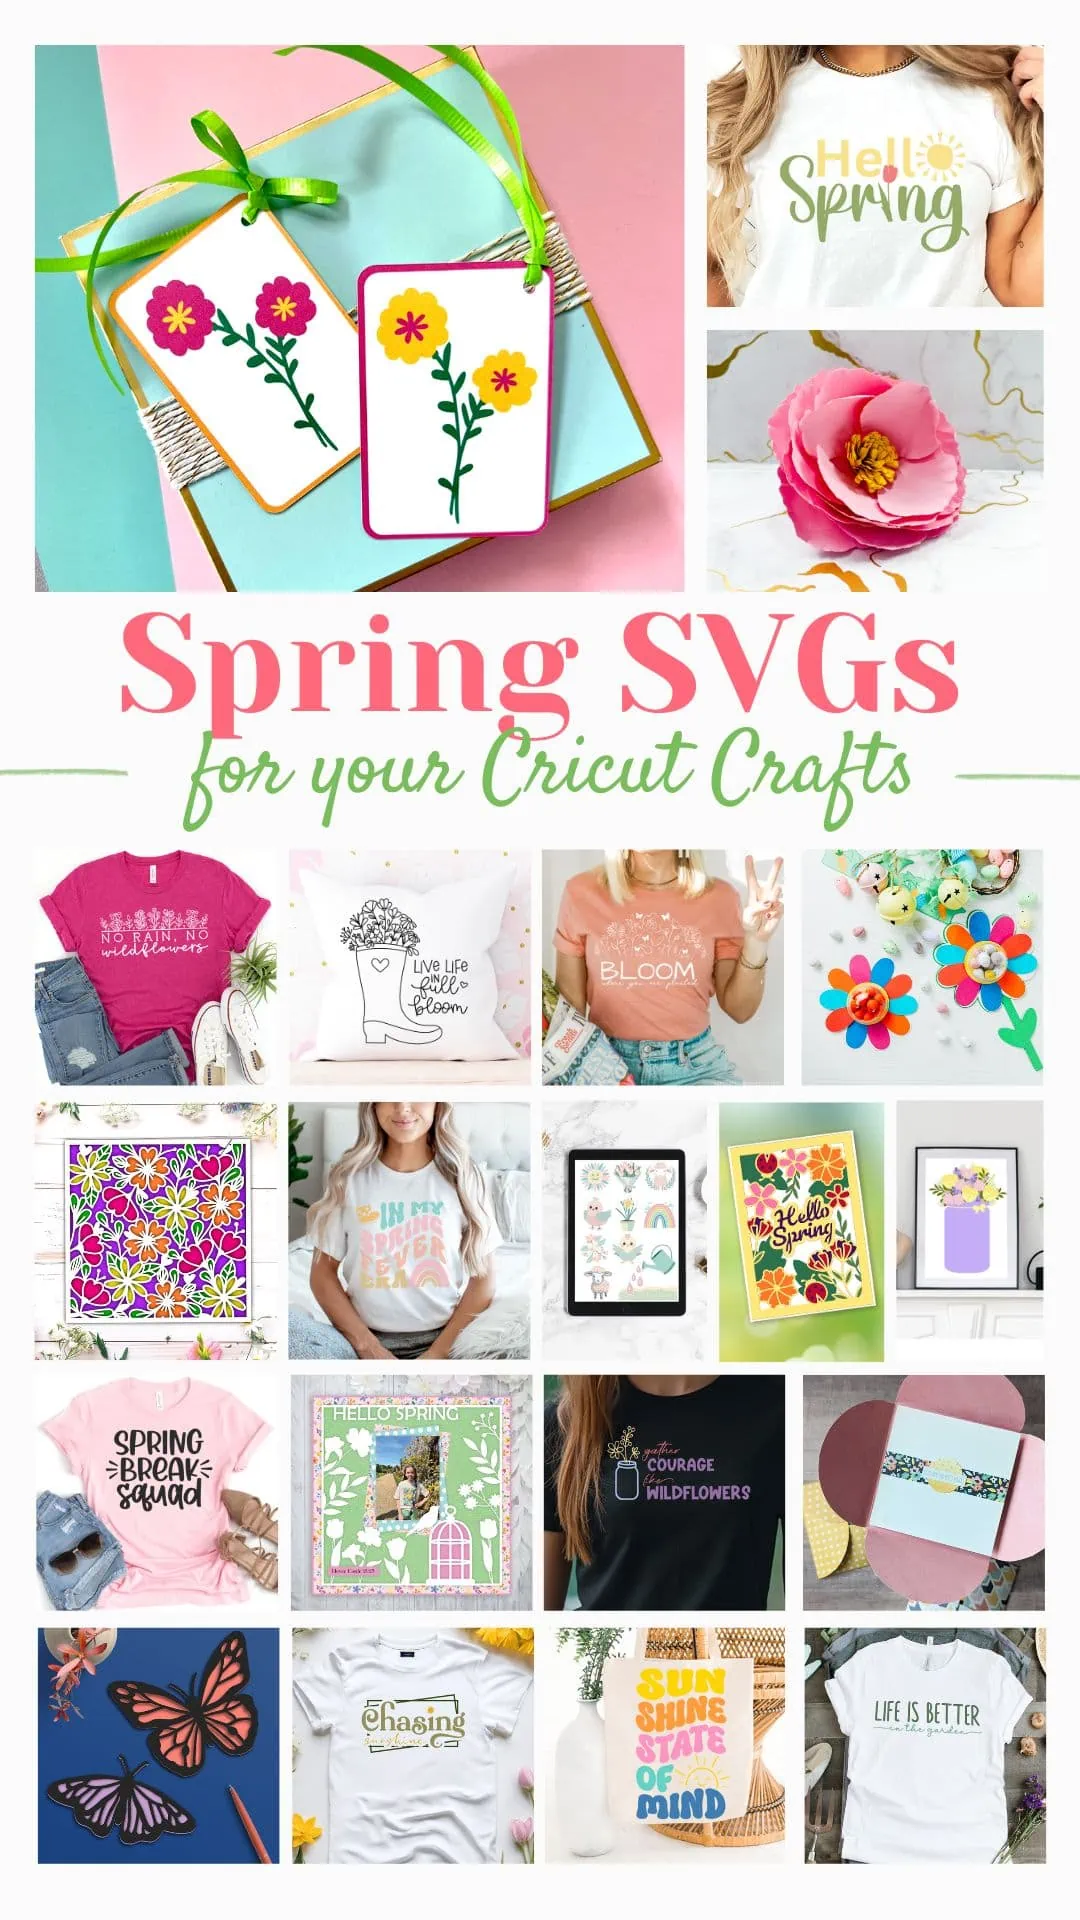 Spring SVG files for Cricut Craftings